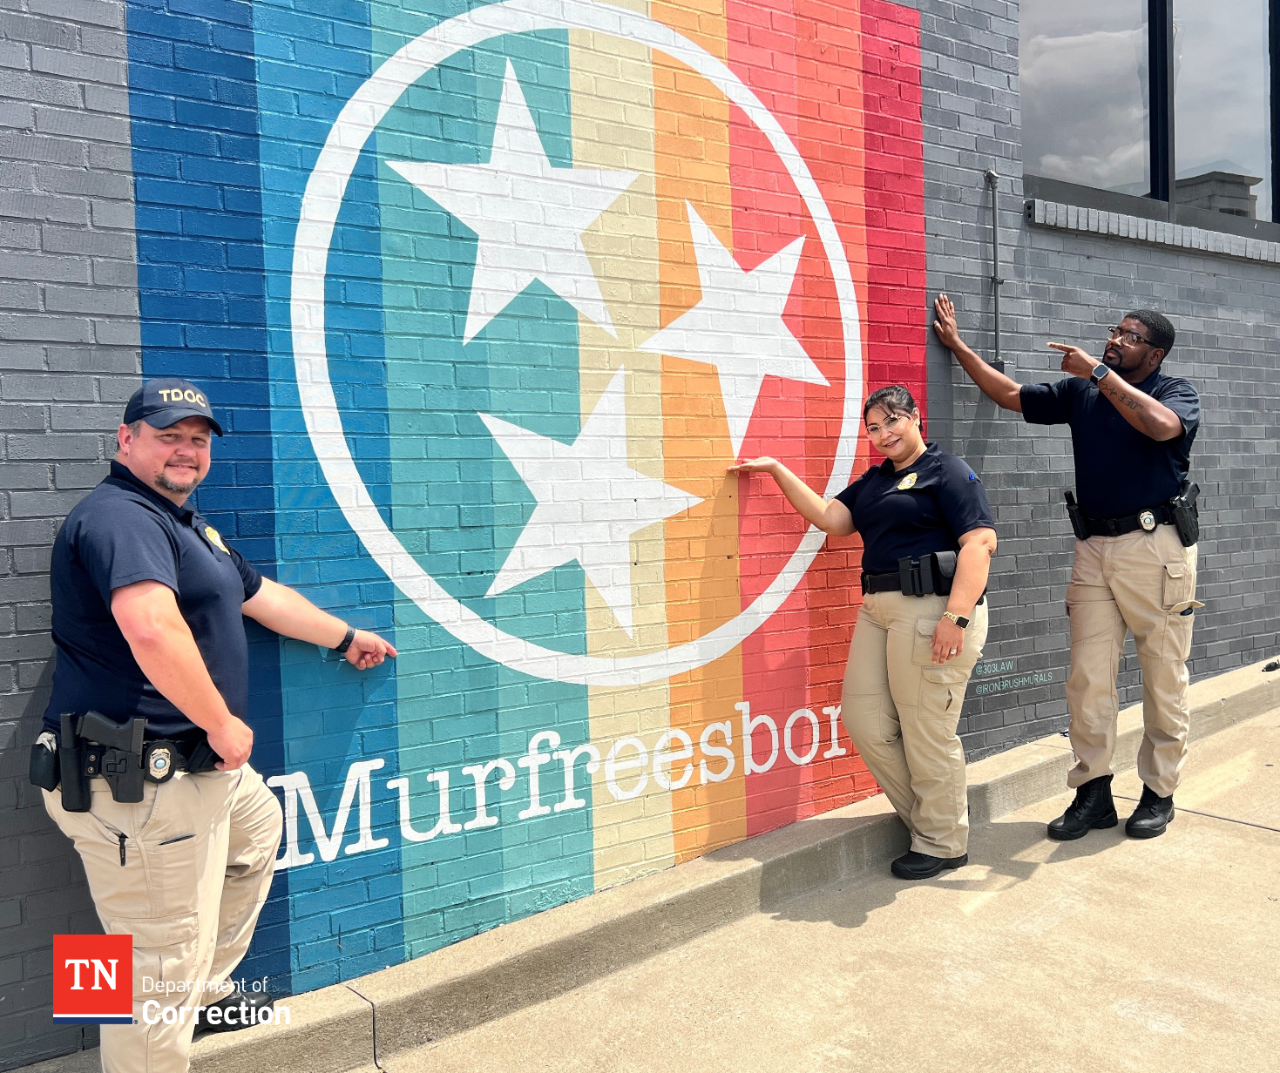 Photo of probation parole officers with Murfreesboro mural